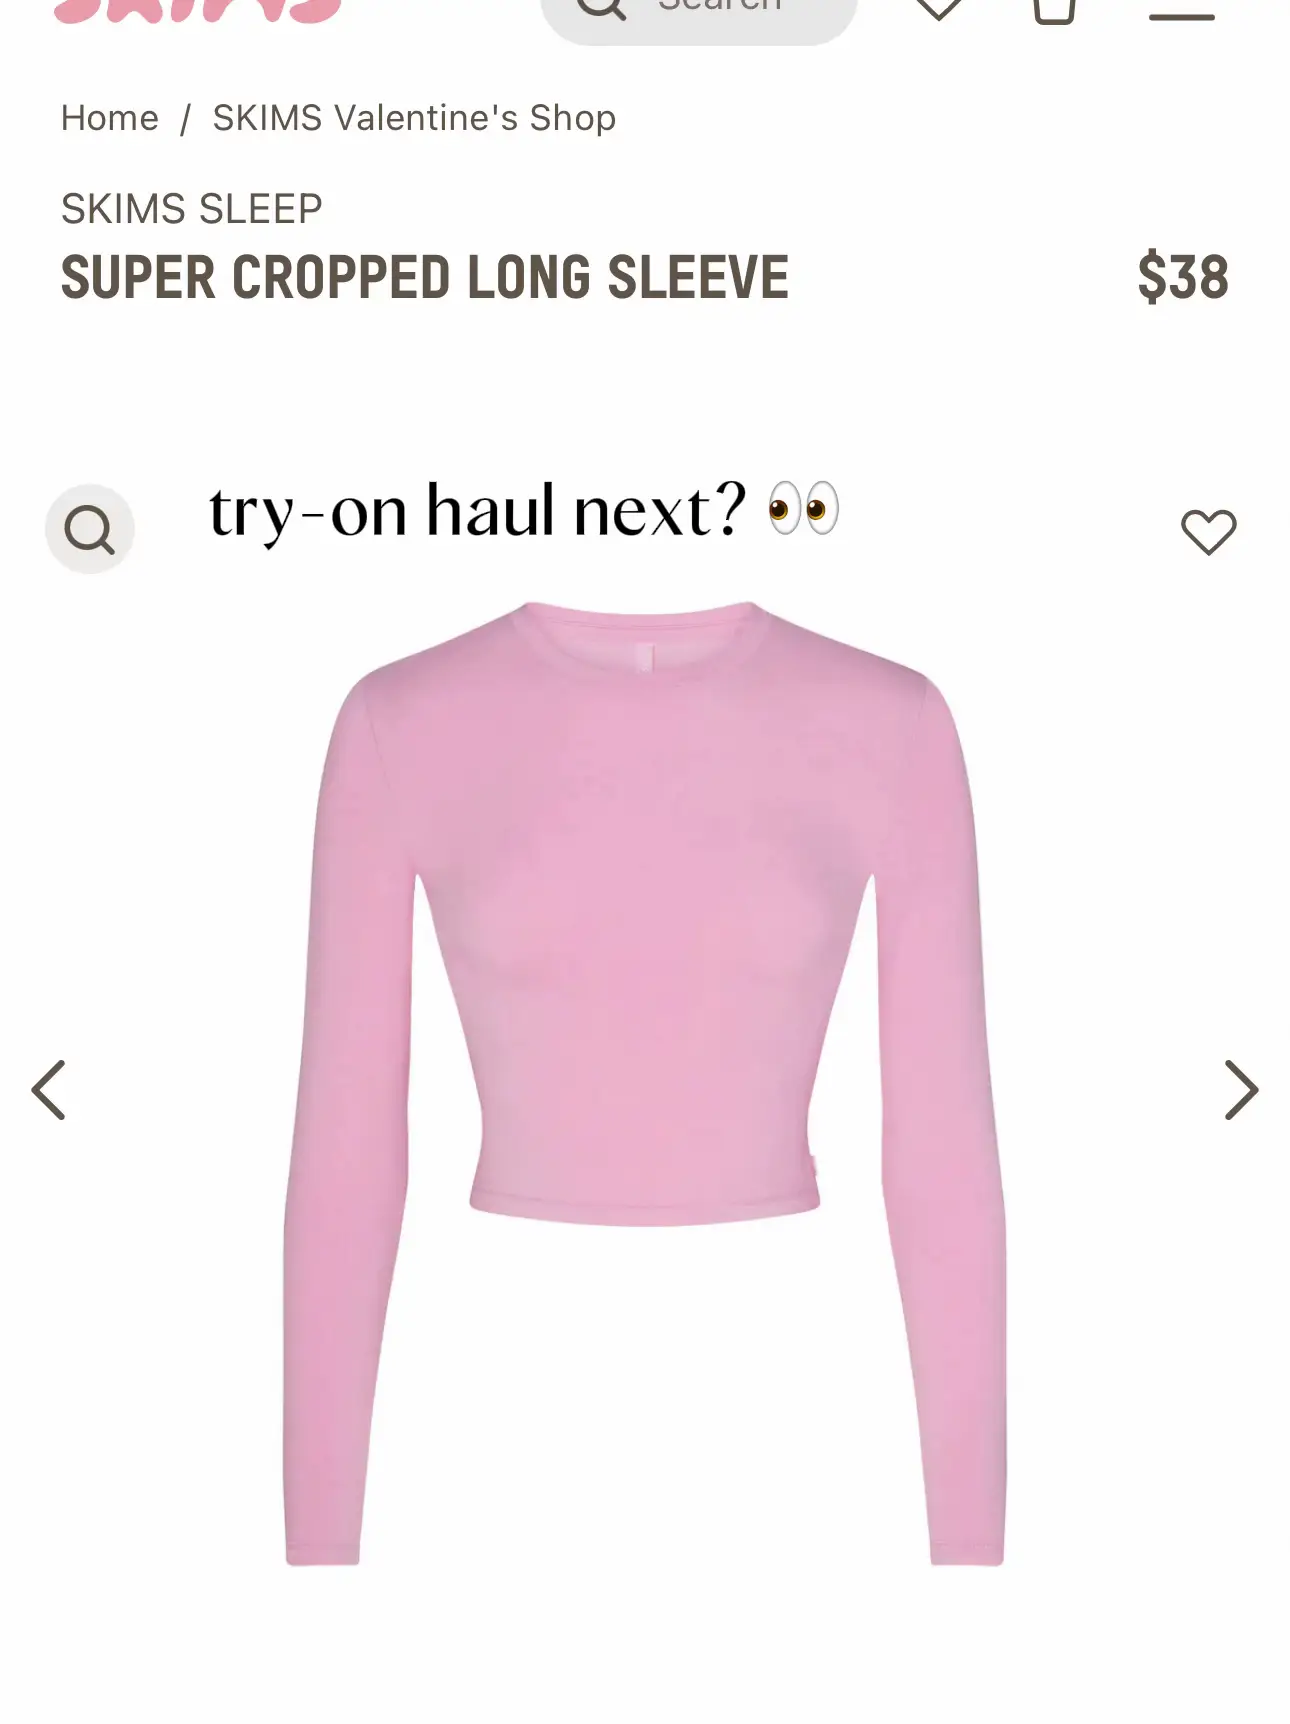 I will be buying more @SKIMS long sleeve tops immediately, a